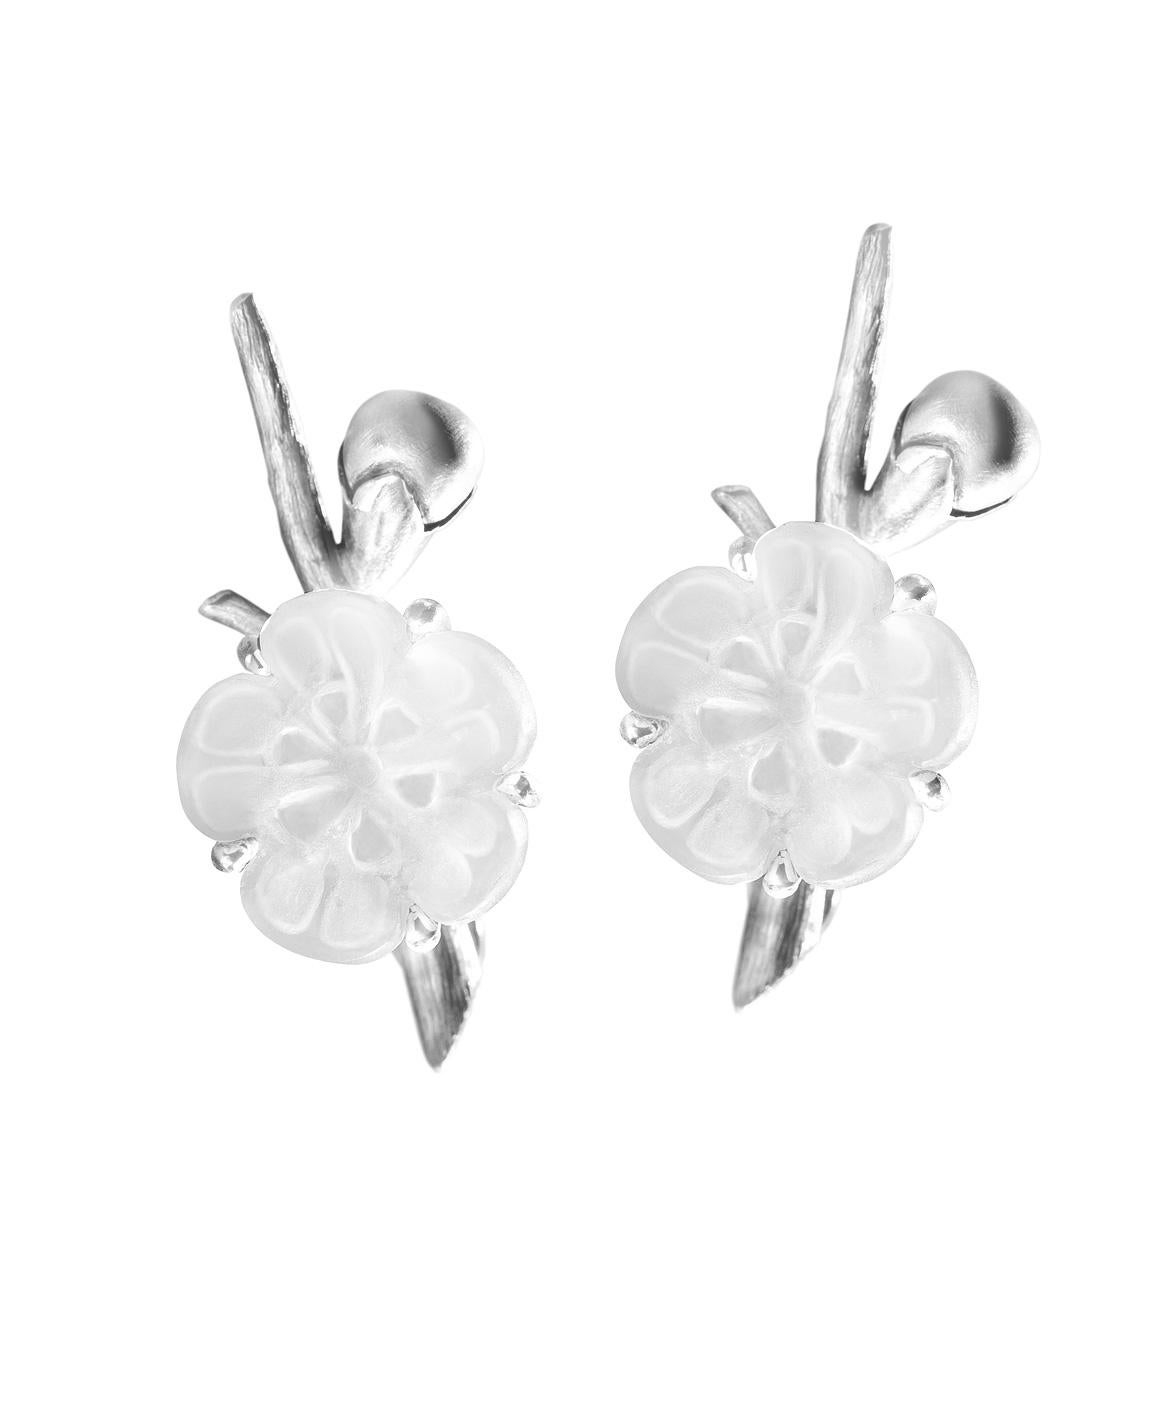 These contemporary earrings in sterling silver belong to the Sakura collection, featuring frosted cherry blossom flowers made of natural crystal. The collection has been showcased in Vogue UA magazine.

These earrings have a contemporary design and